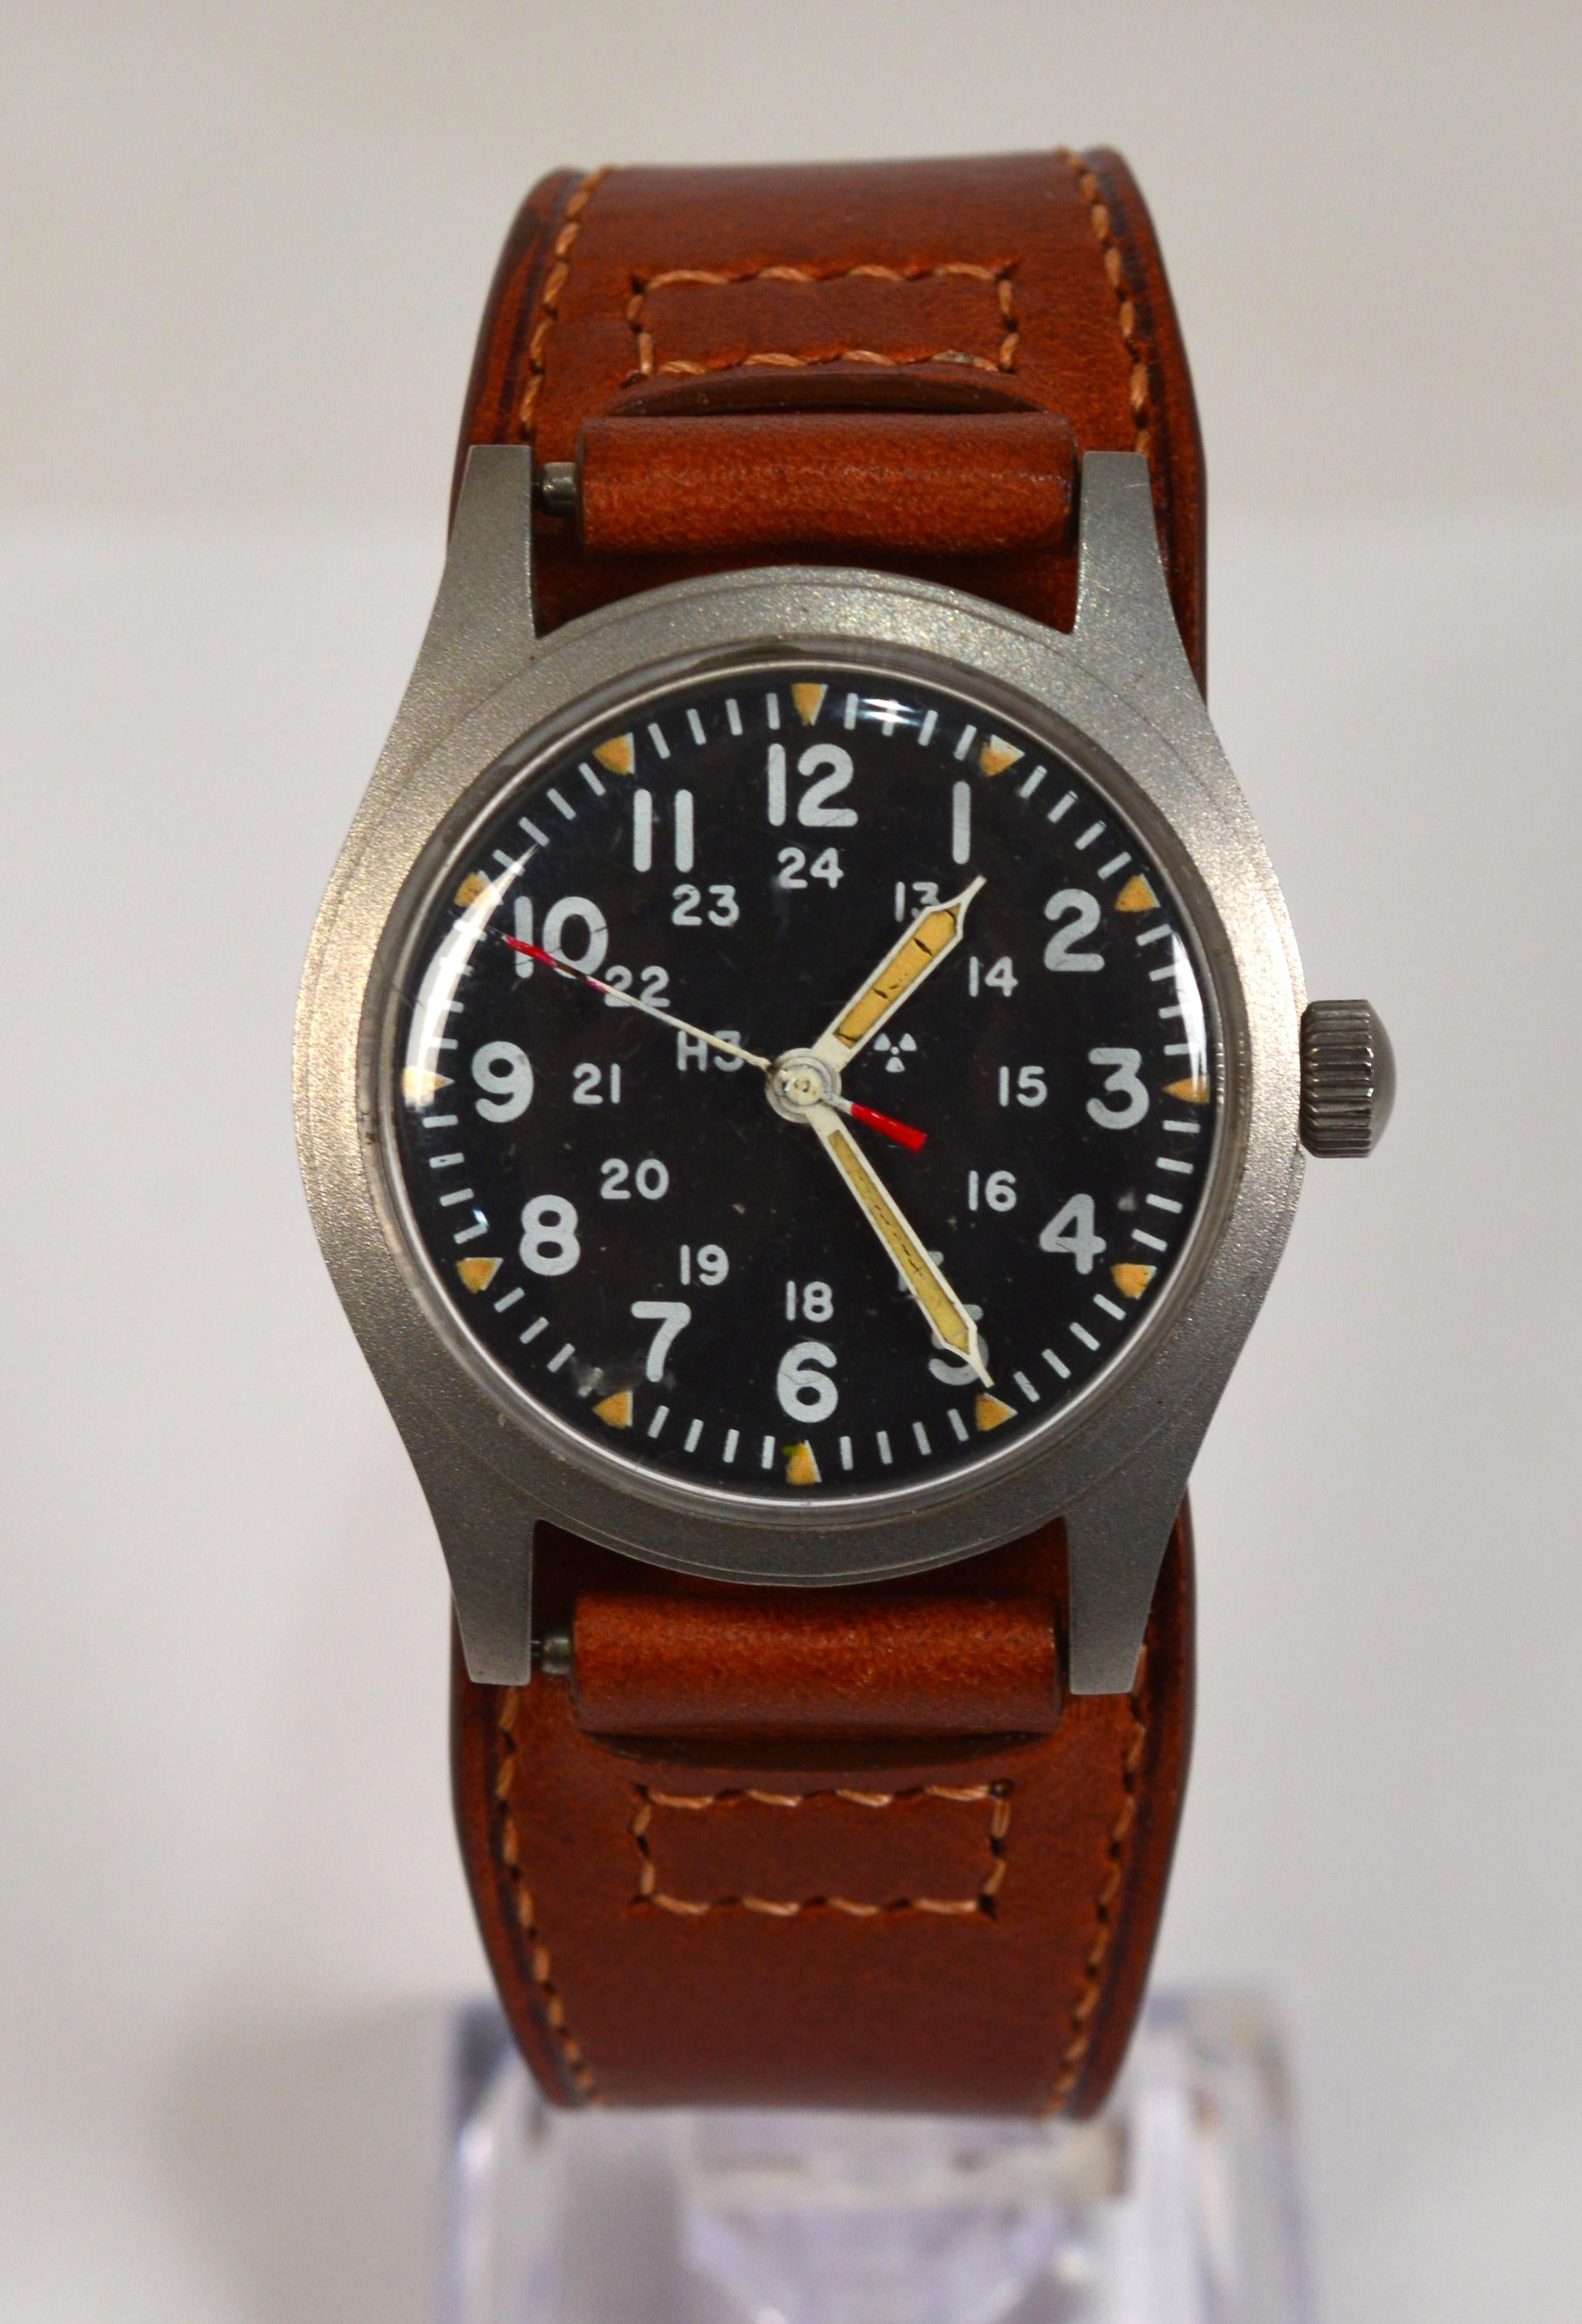 The Hamilton 6645 Steel US Army Wrist Watch was first introduced to military personnel during the Vietnam era.  The identical watch continued in production until February 1982. This watch has a 34mm satin steel case and is powered by a manual Swiss